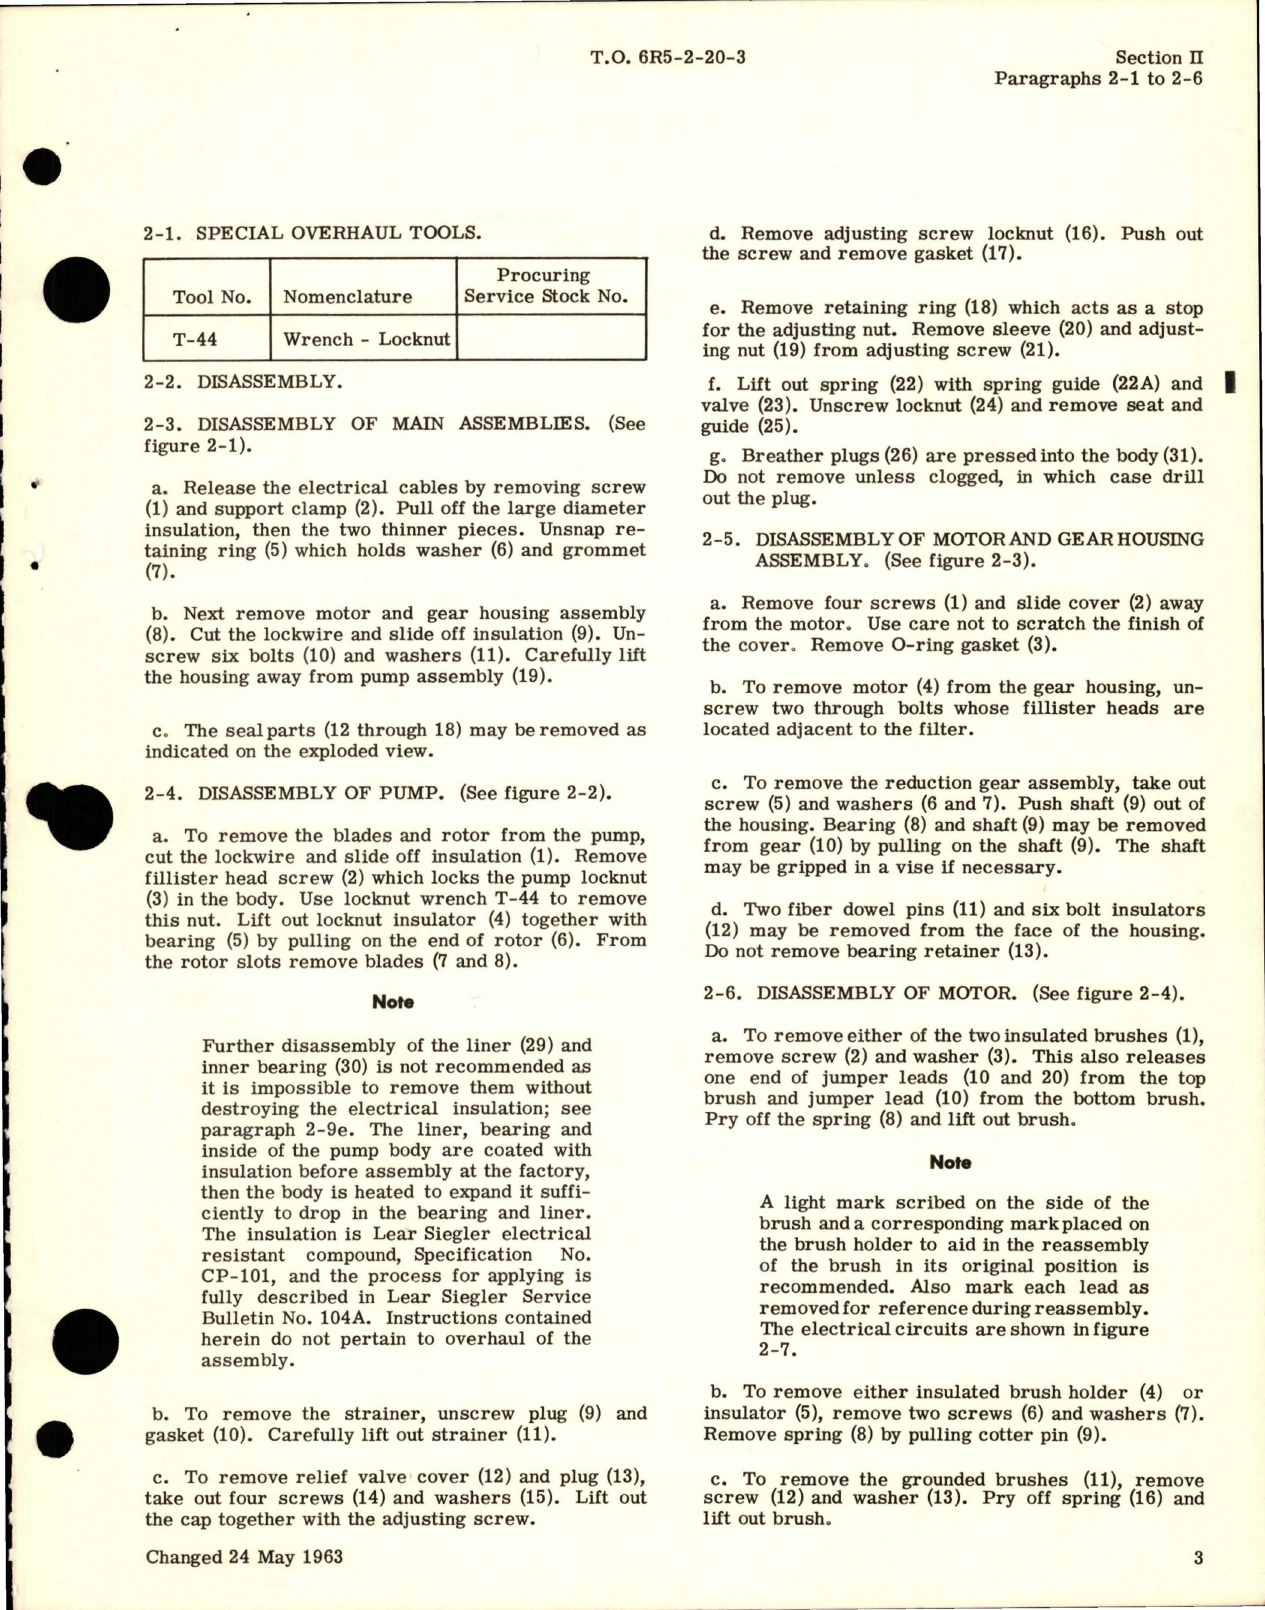 Sample page 7 from AirCorps Library document: Overhaul Instructions for Power Driven Rotary Pump - Models RG8825F and RG8825A